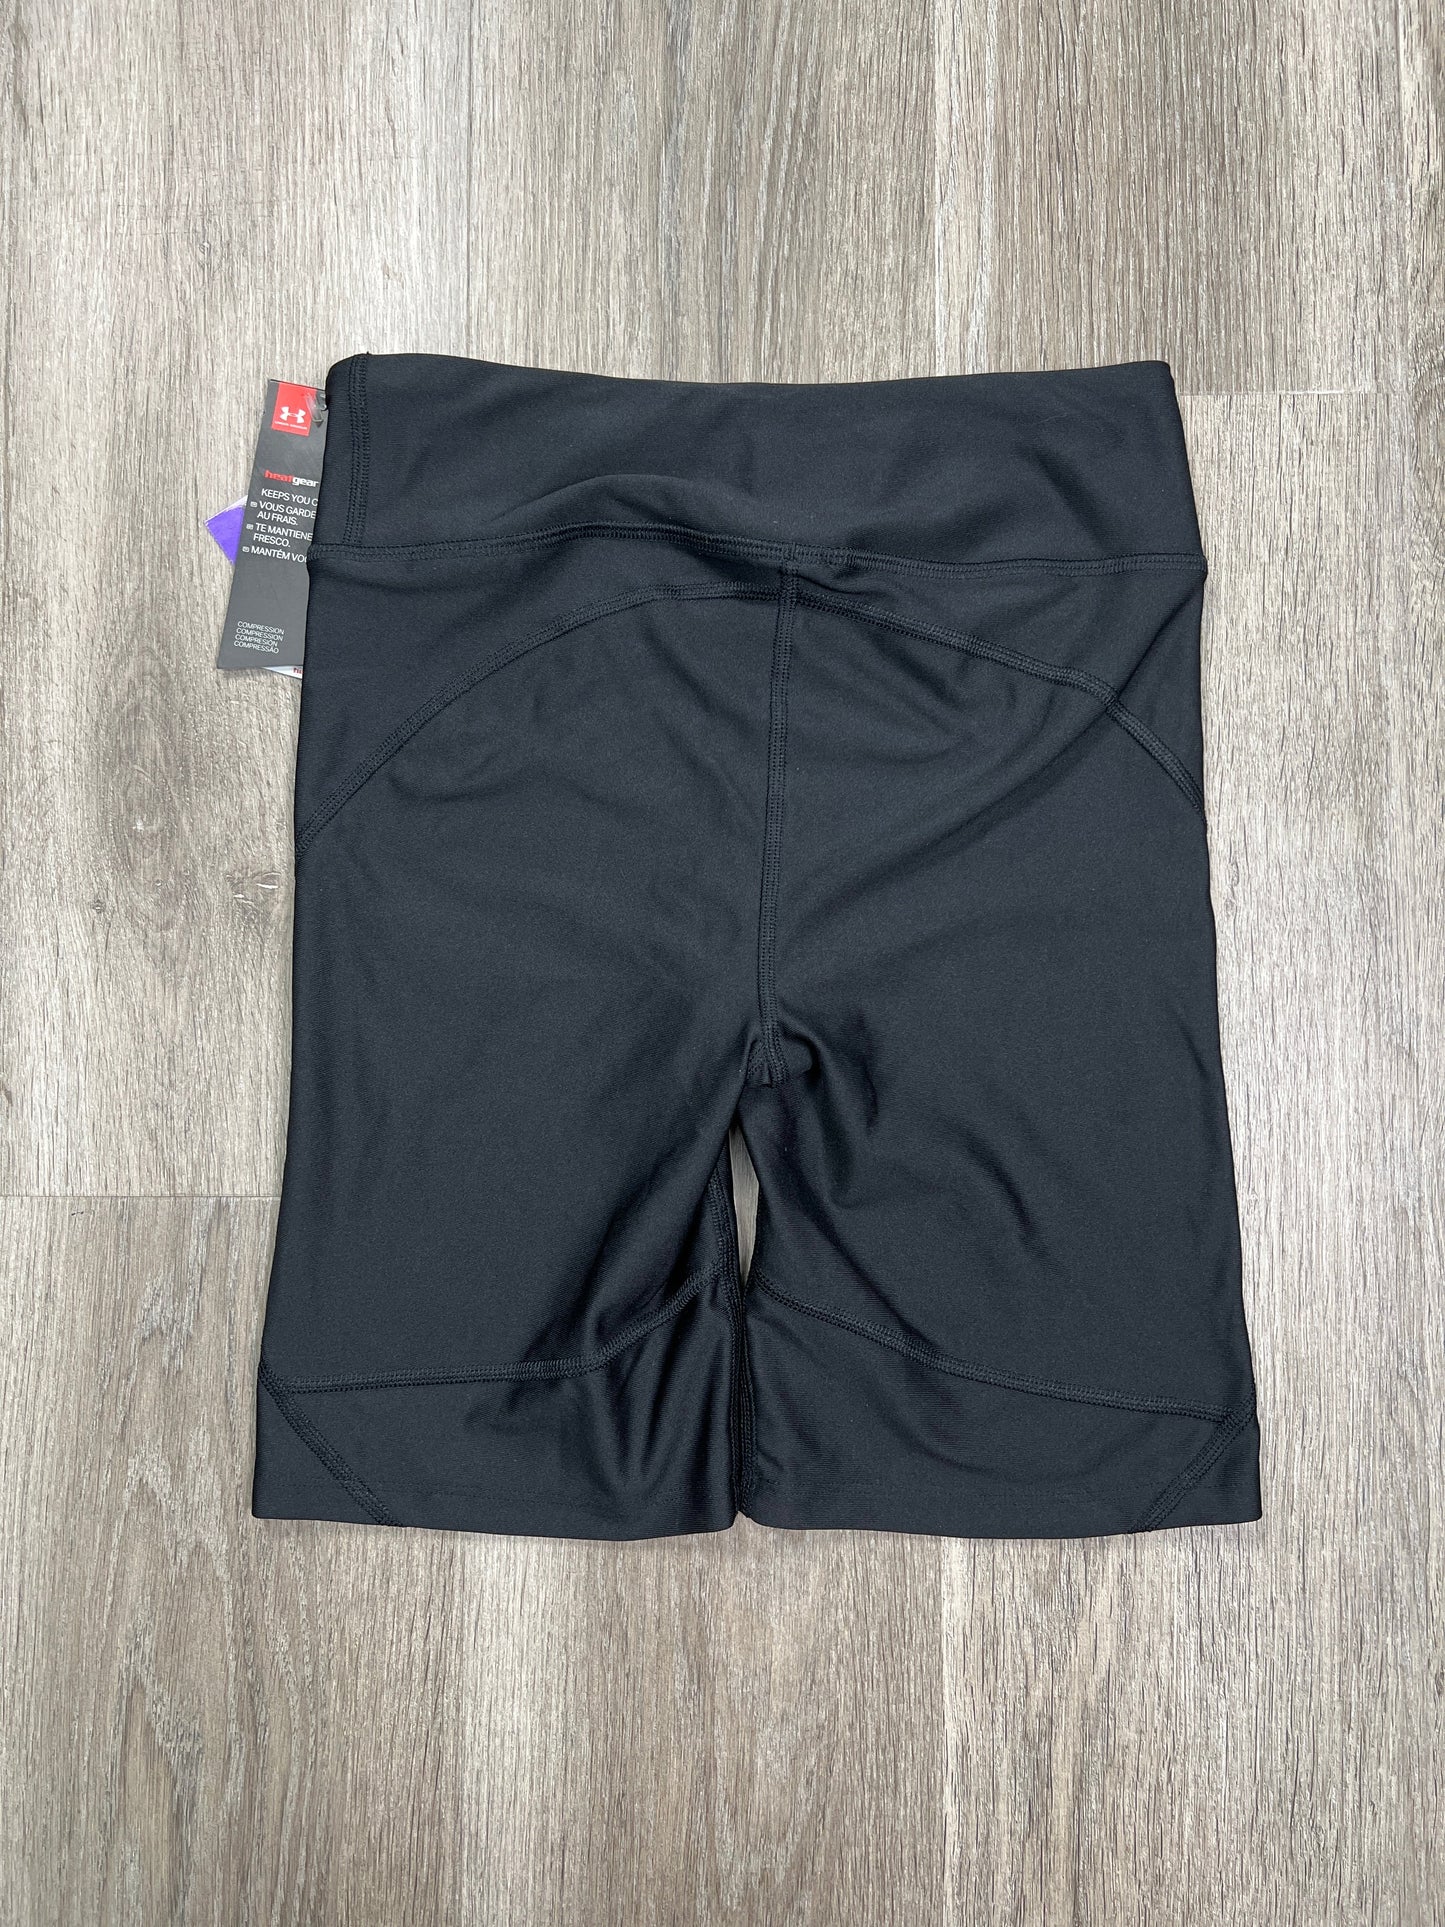 Black Athletic Shorts Under Armour, Size S